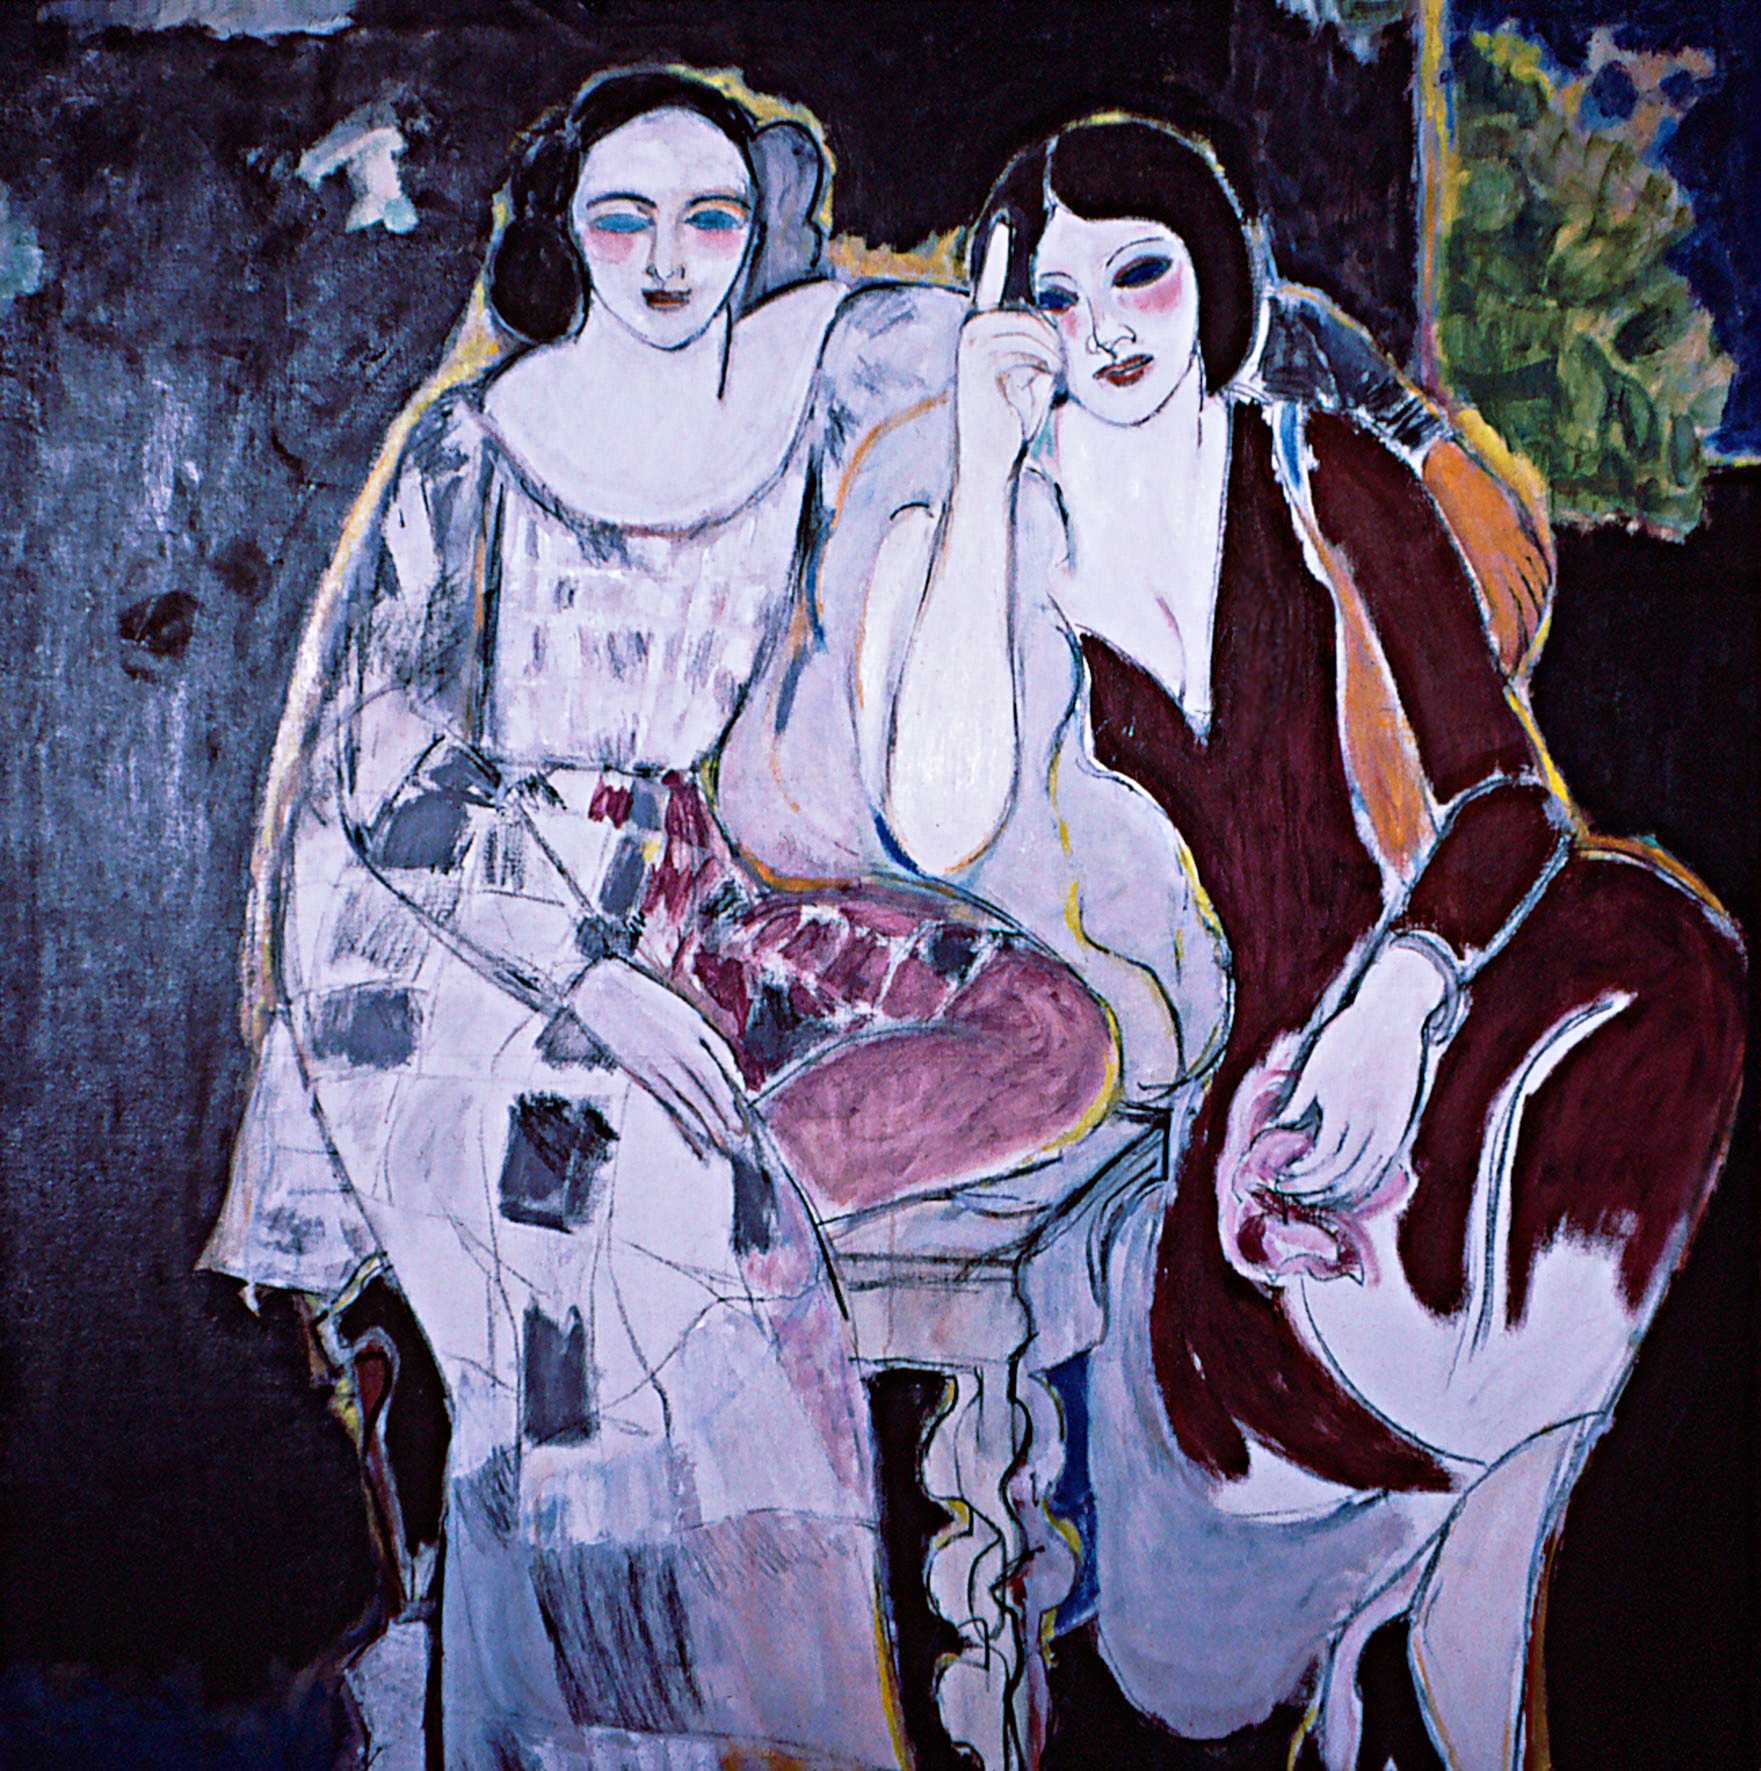 Thumbnail of Two Sisters: Painting by Ethel Fisher, 1964, oil on linen, 44 x 42 inches, mid-twentieth century figure painting.